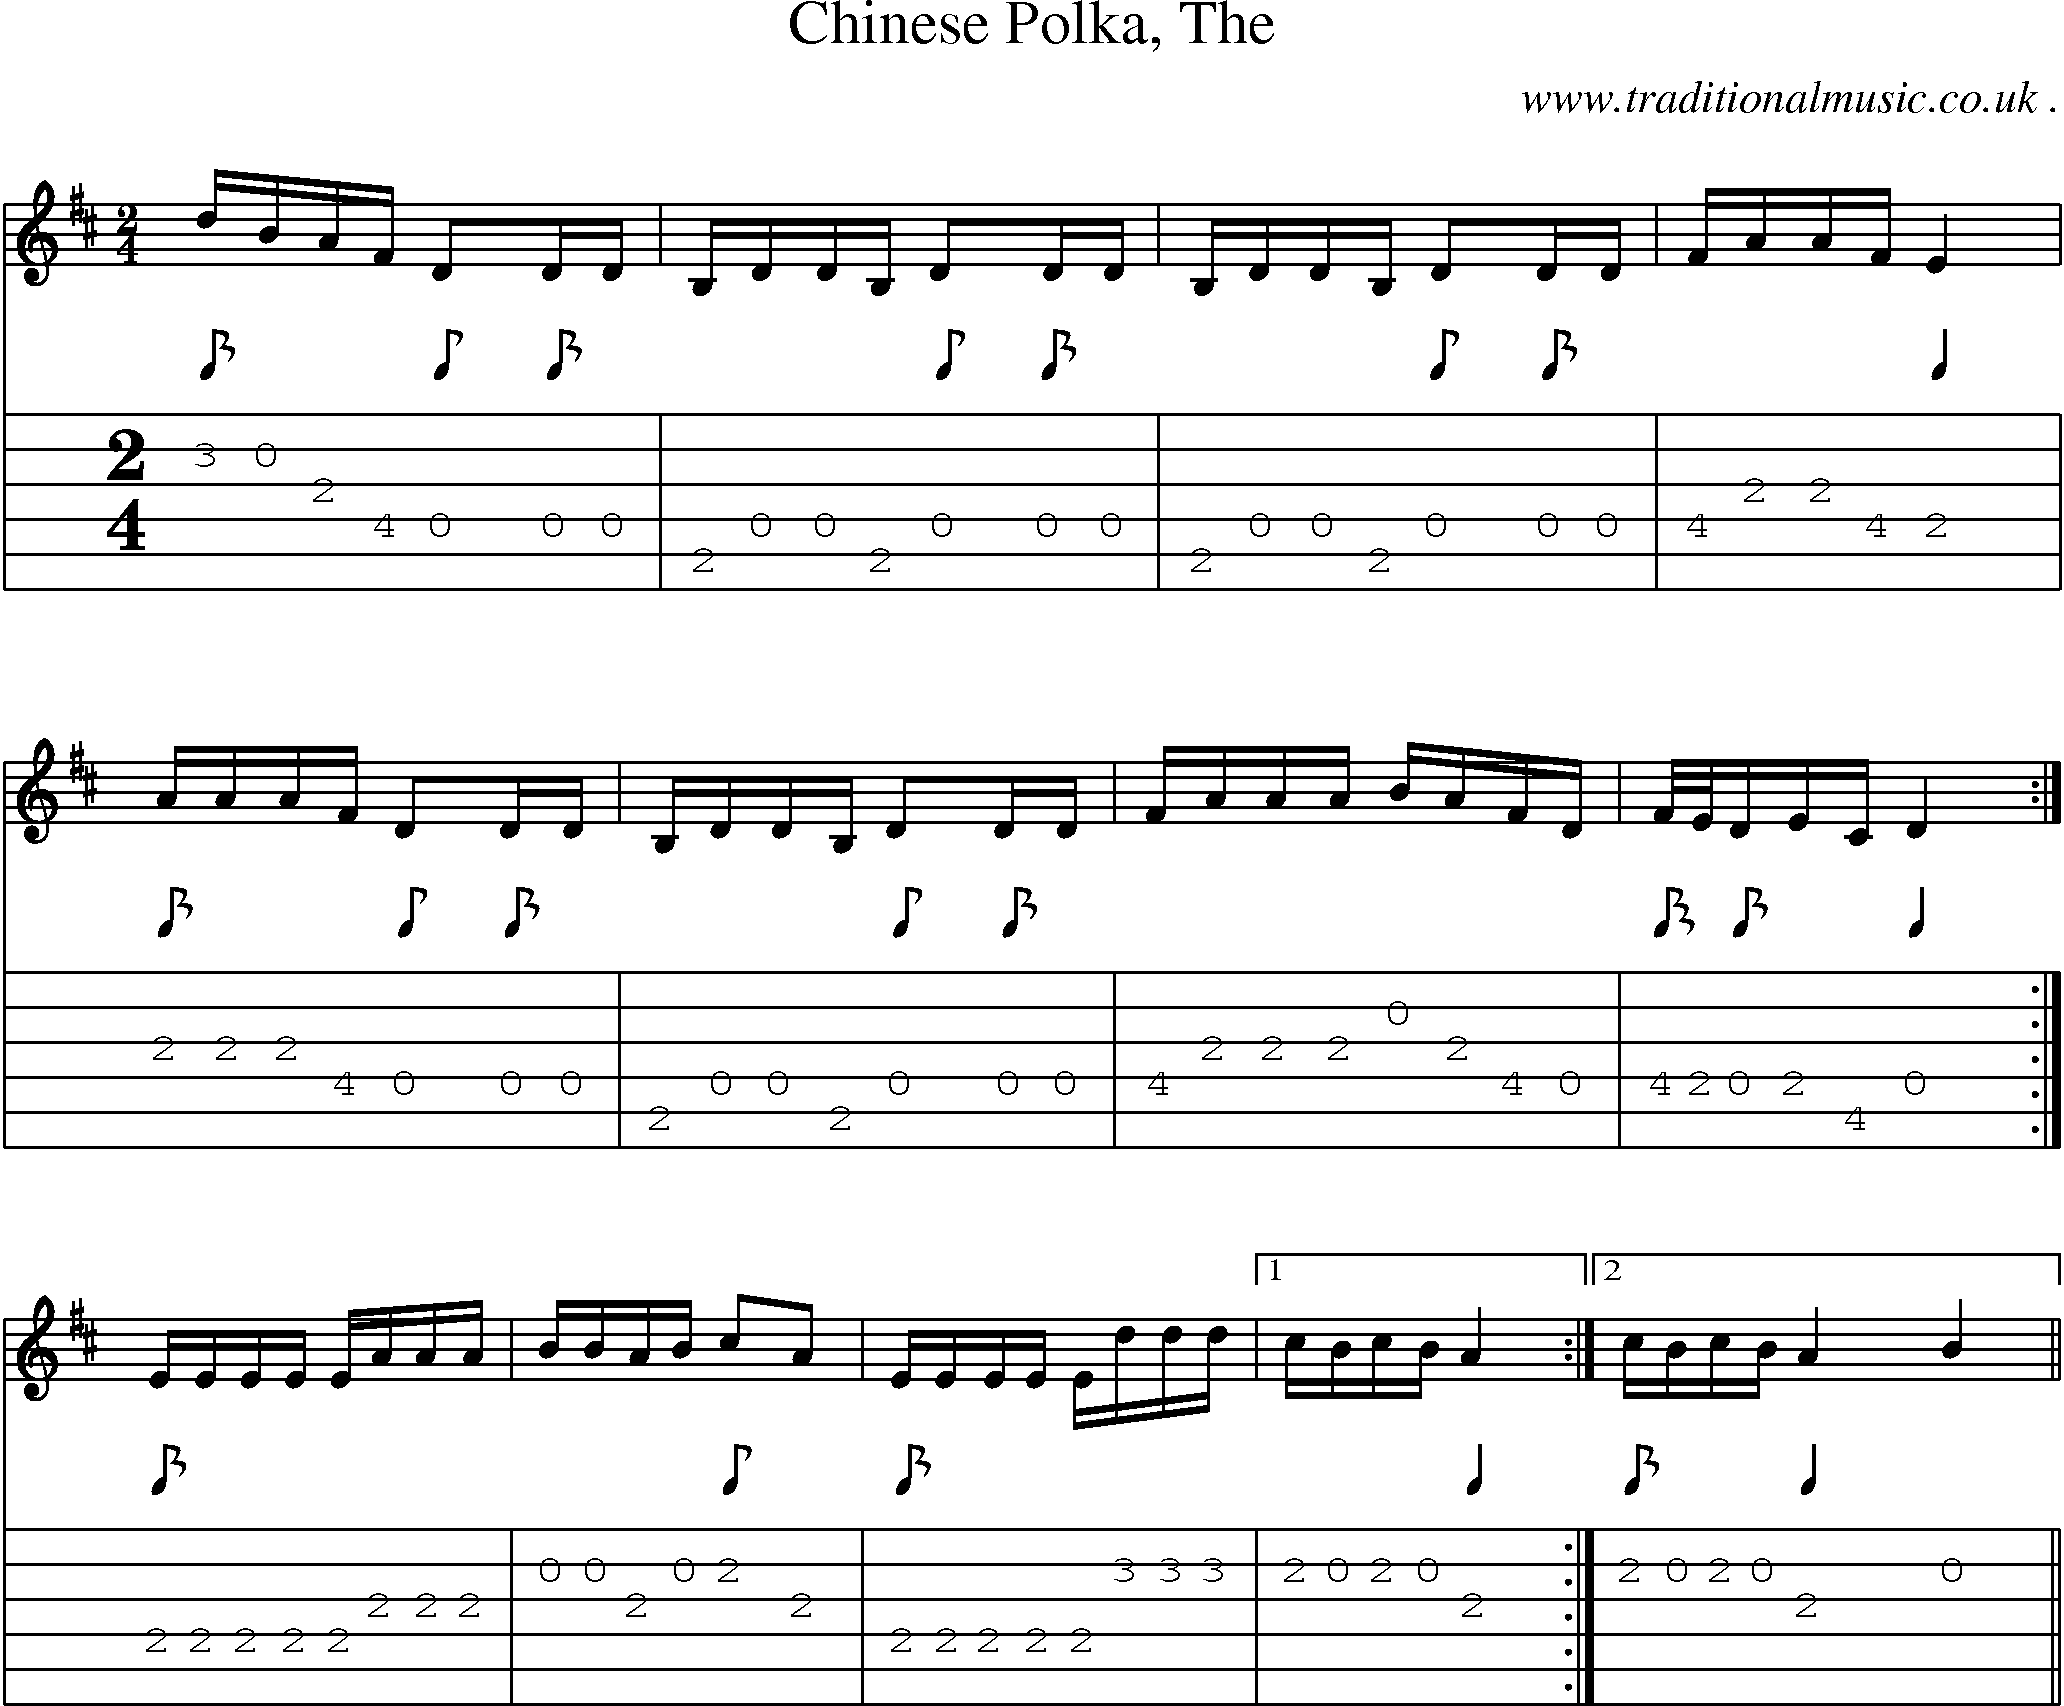 Music Score and Guitar Tabs for Chinese Polka The